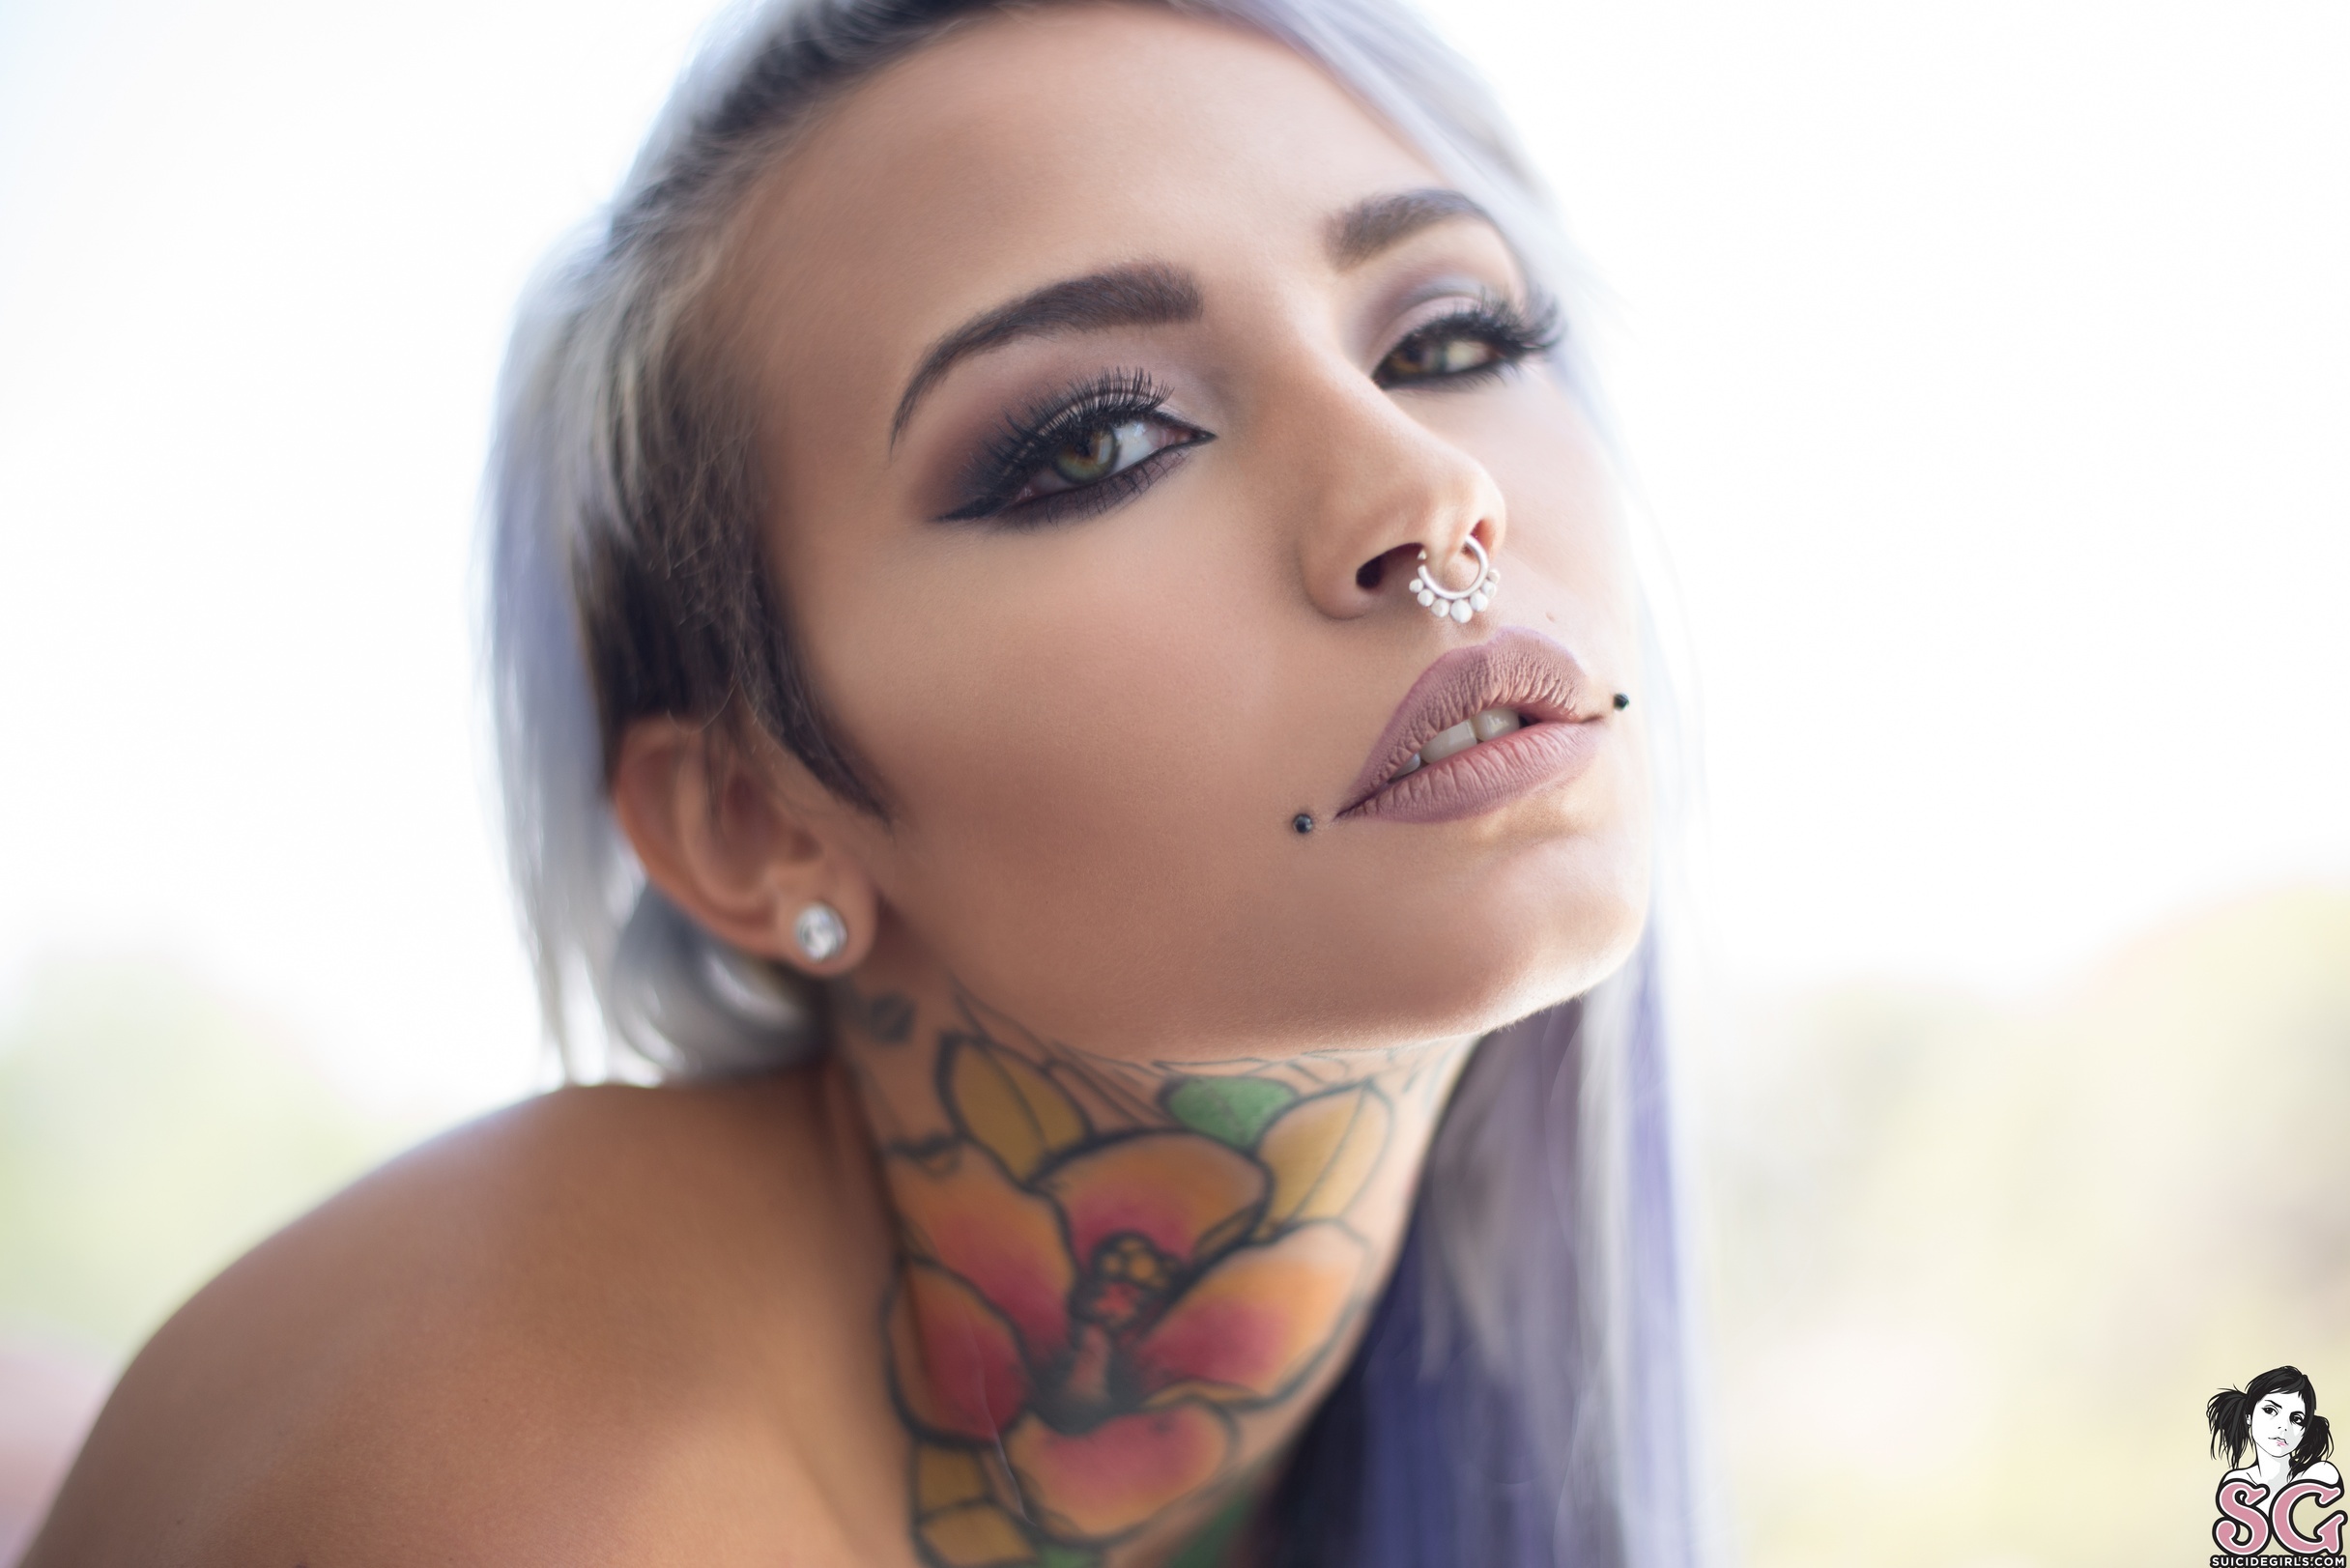 People 2432x1623 Fishball Suicide Suicide Girls blue hair pierced nose women simple background watermarked